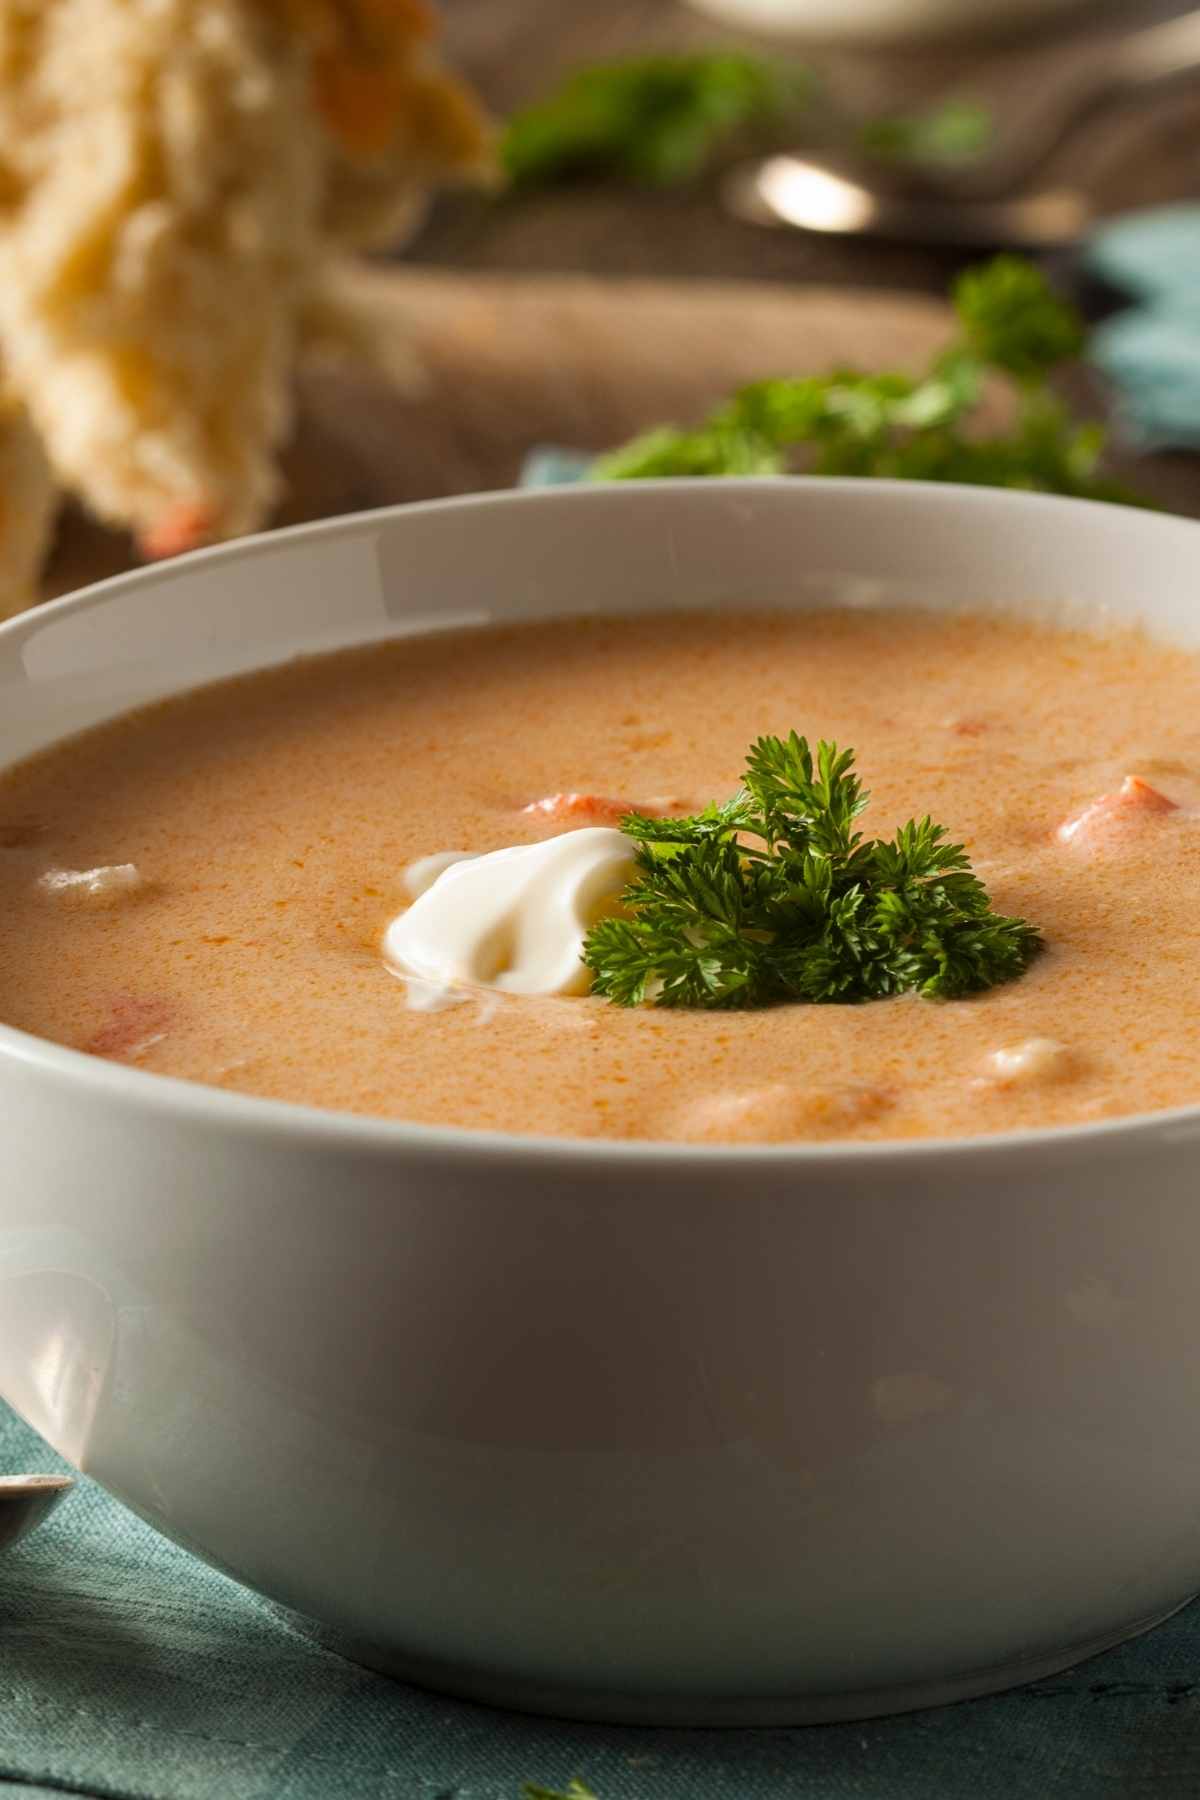 Succulent pieces of crawfish meat are served in a creamy, satisfying soup that’s sure to satisfy your Cajun cravings. Packed with flavor and a bit of a spicy kick, this Crawfish Bisque is a dish you’ll come back to, time and time again.